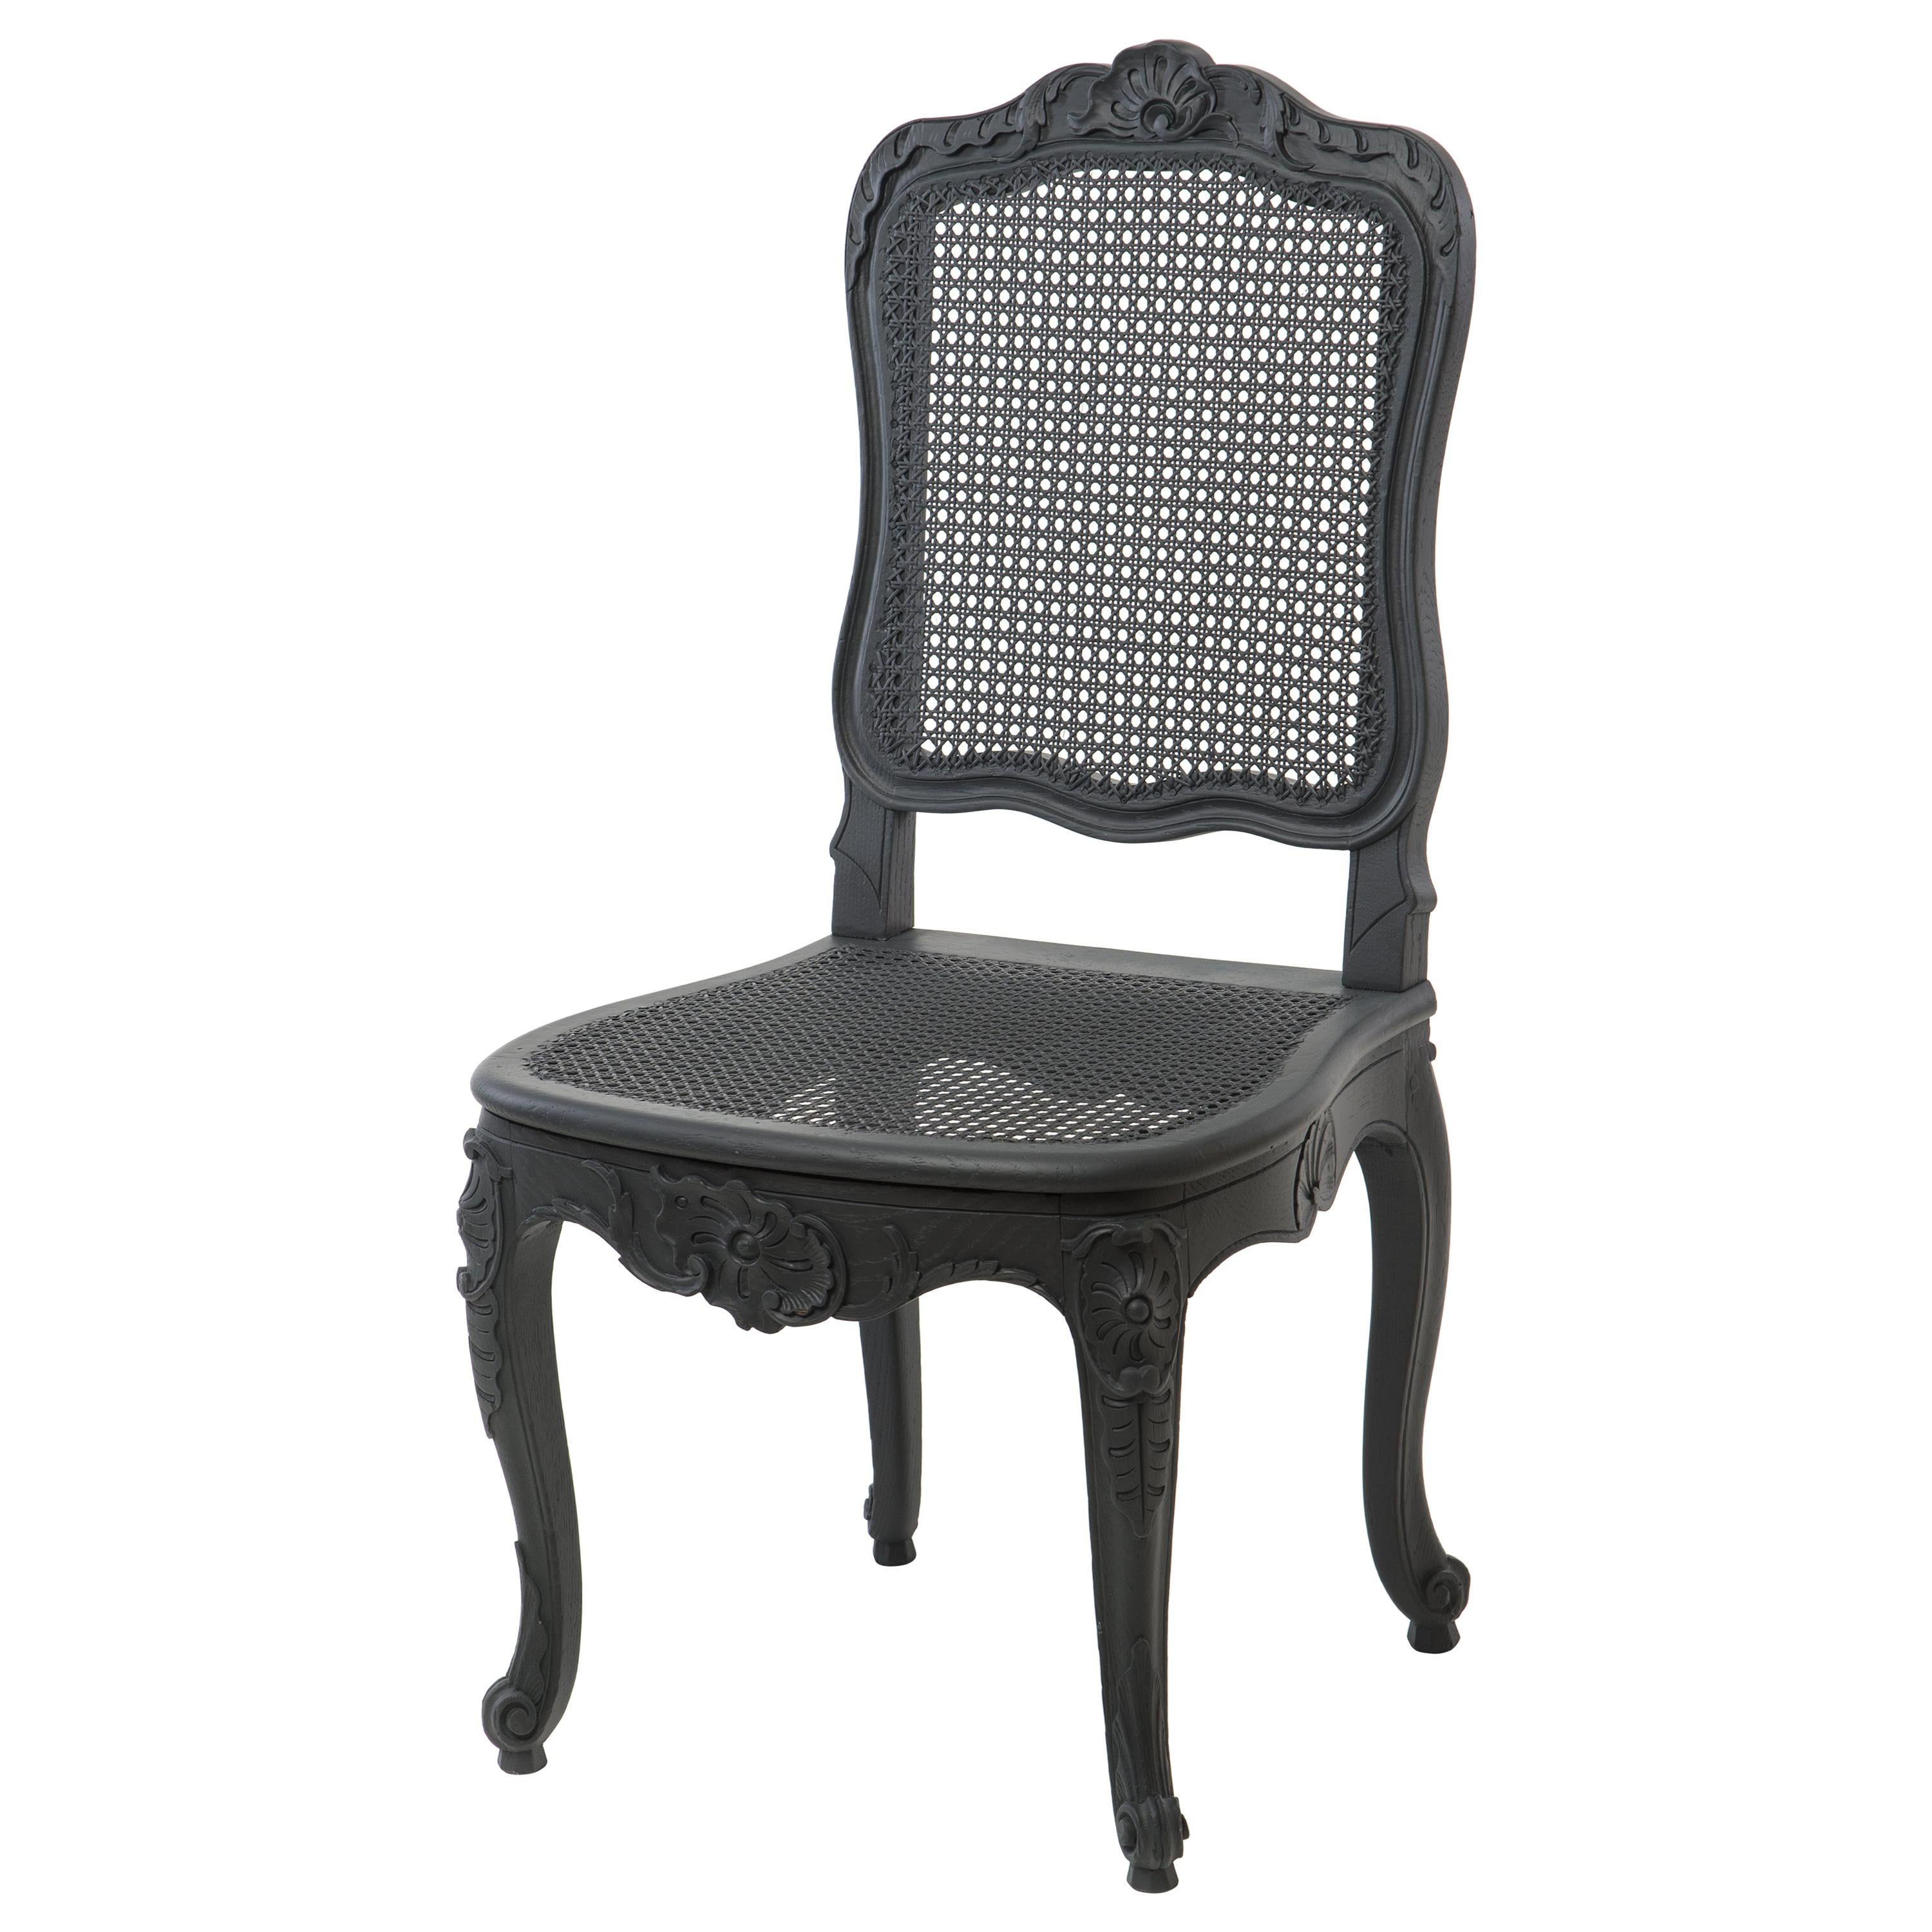 Set of 5 Gustavian Styled Chairs with Wicker Seat and Backrest